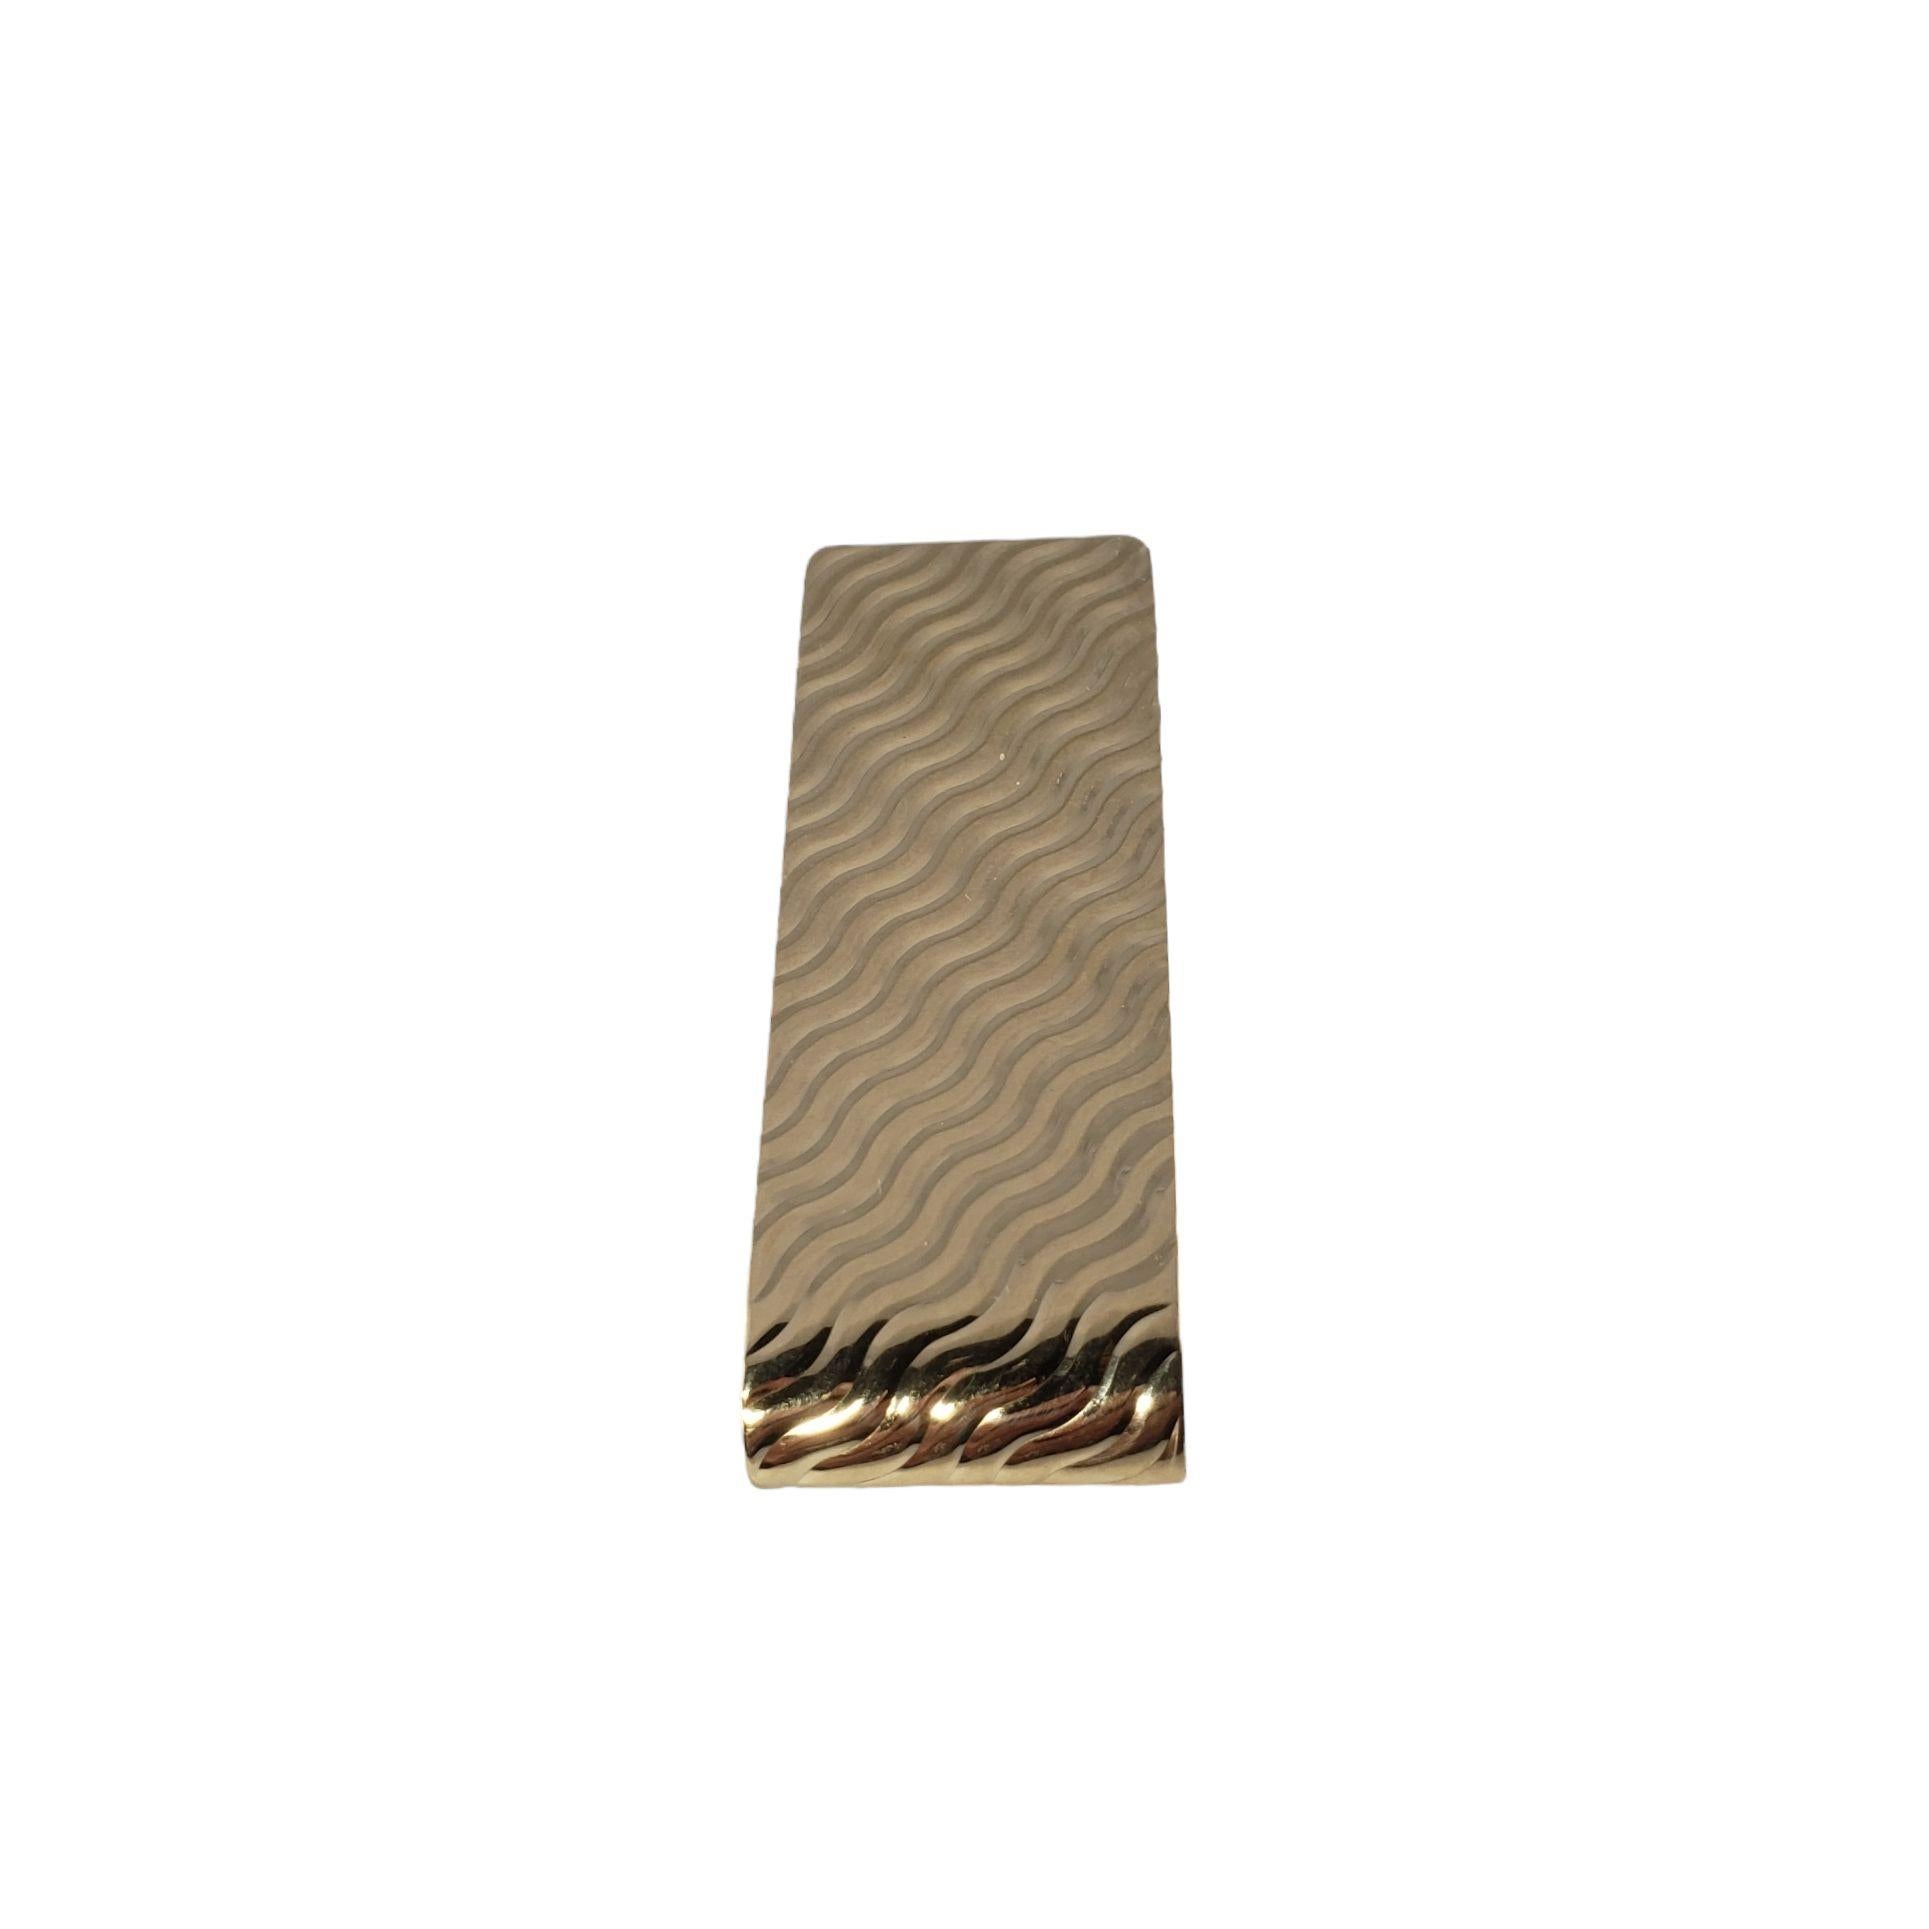 This elegant money clip is crafted in meticulously detailed 14K yellow gold by Cartier.

Size: 2